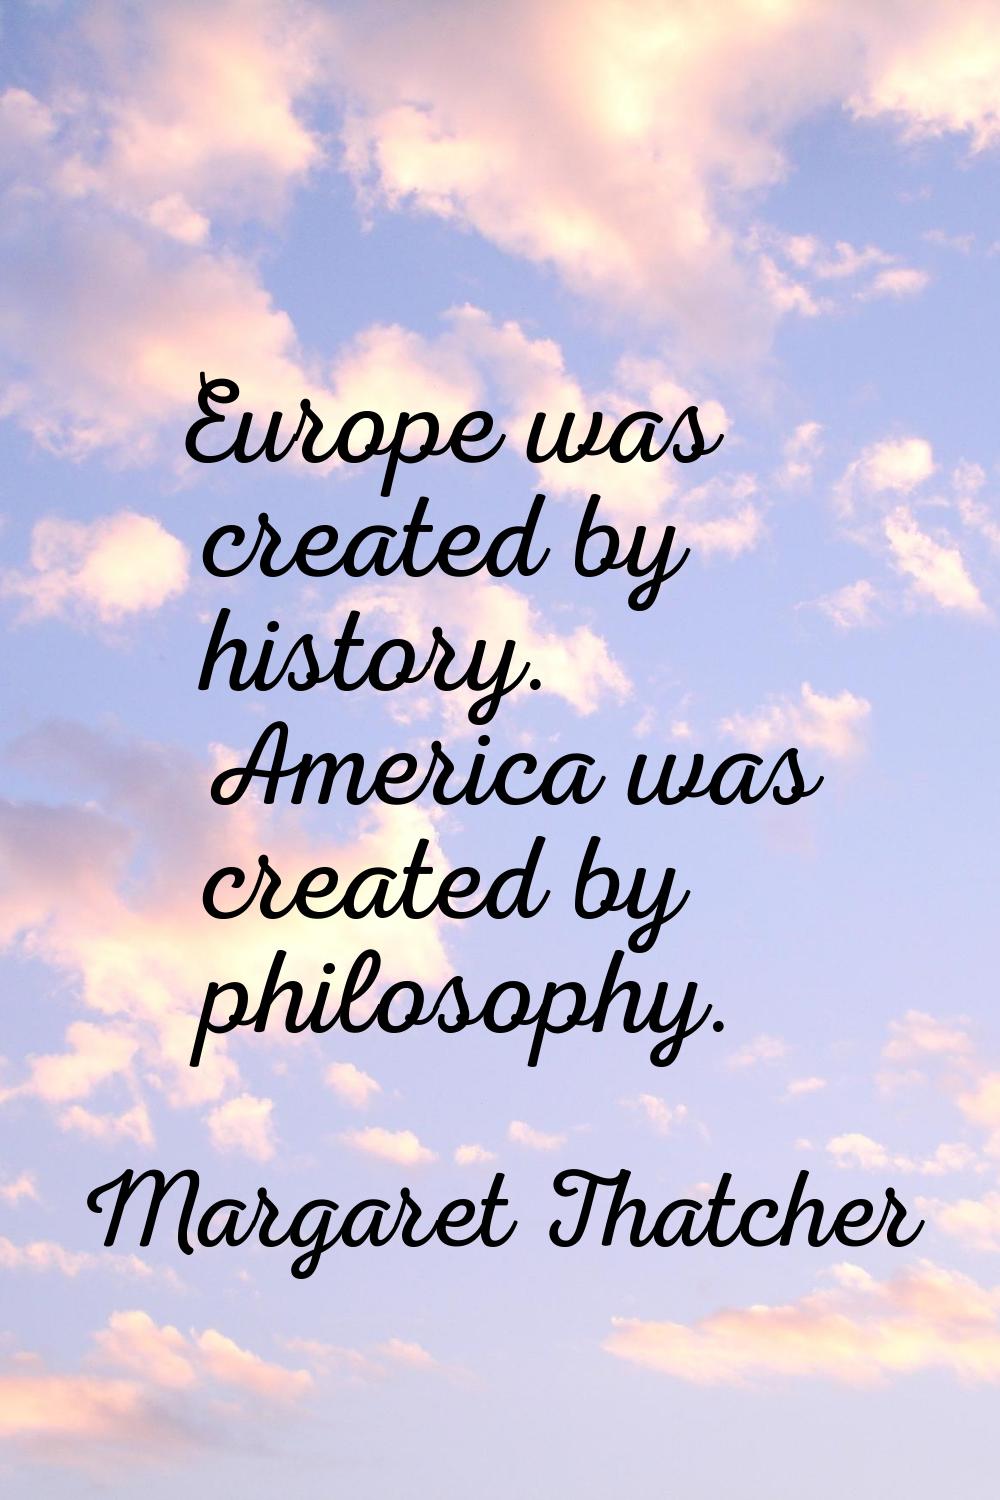 Europe was created by history. America was created by philosophy.